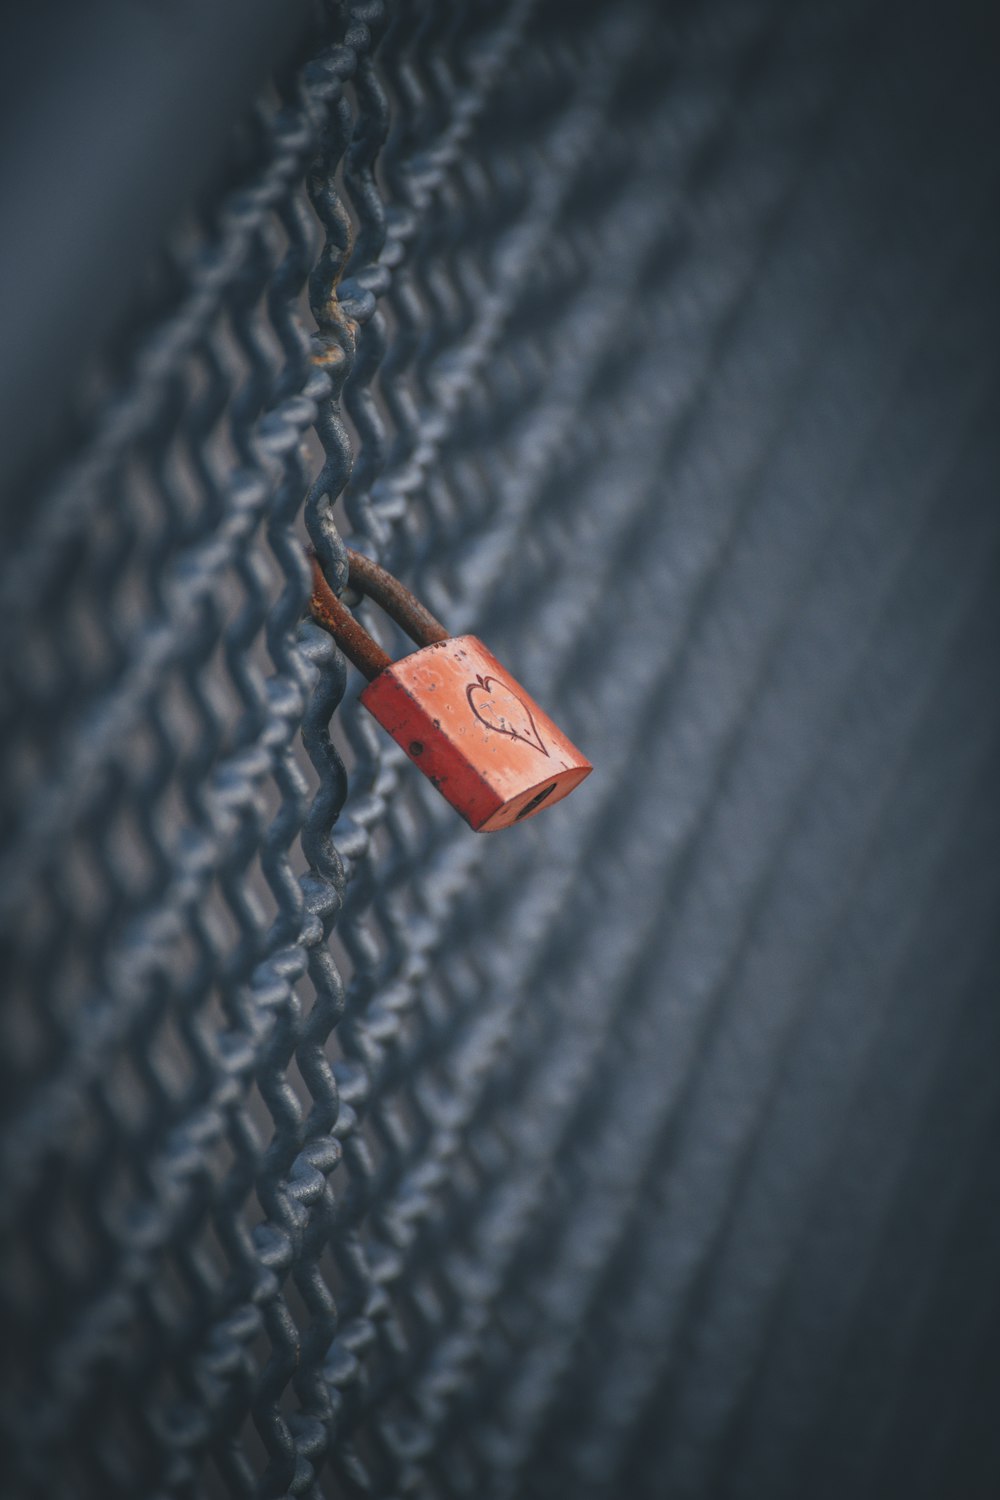 a red padlock on a chain link fence